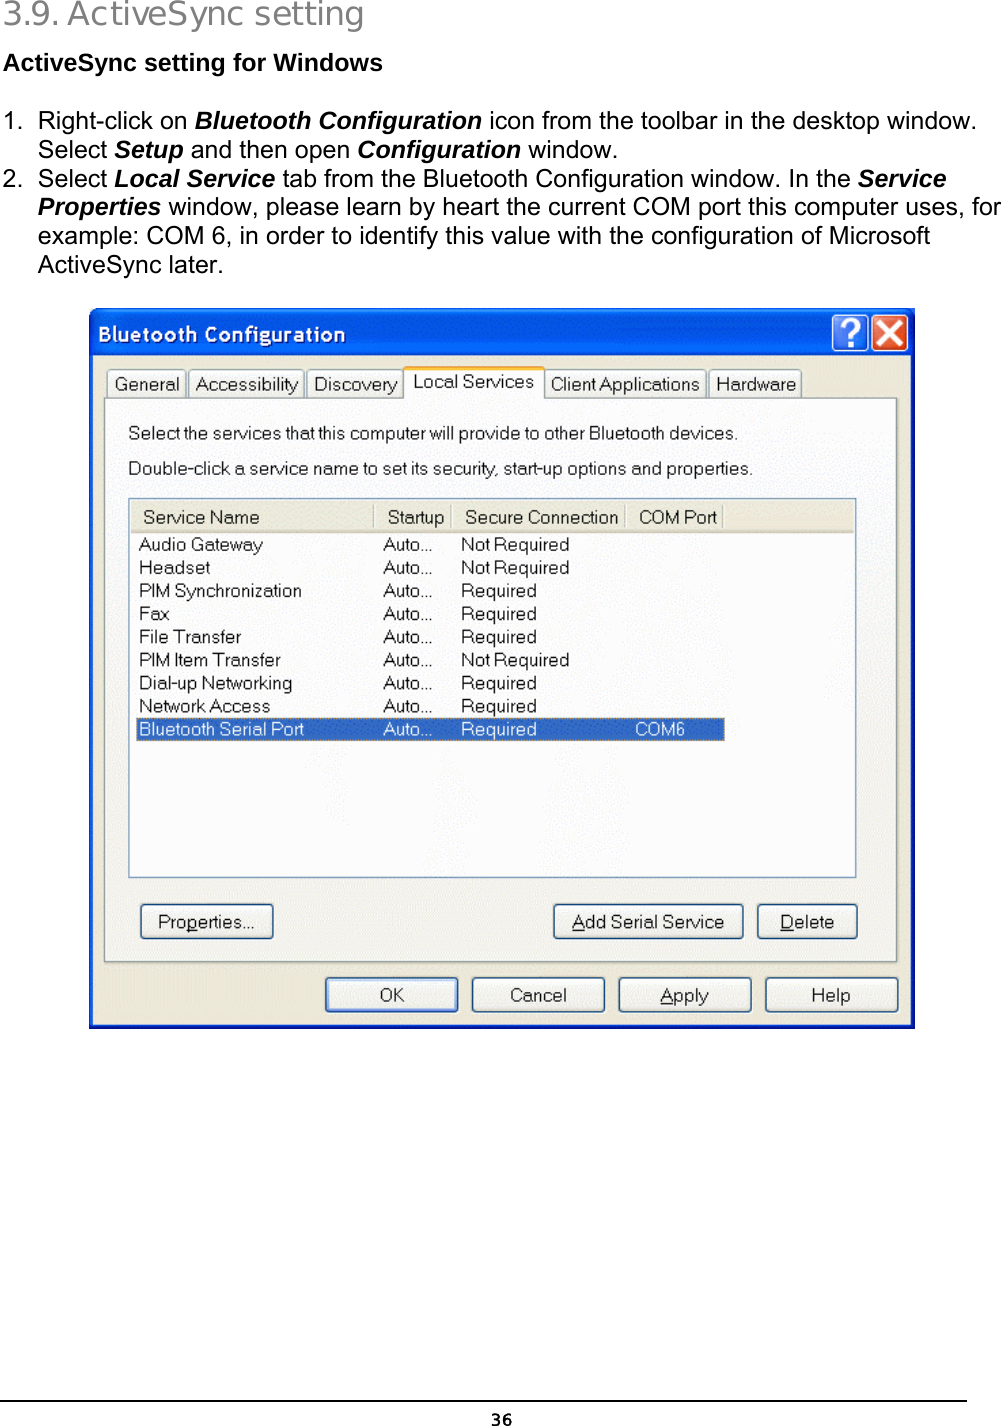   363.9. ActiveSync setting  ActiveSync setting for Windows 1. Right-click on Bluetooth Configuration icon from the toolbar in the desktop window. Select Setup and then open Configuration window. 2. Select Local Service tab from the Bluetooth Configuration window. In the Service Properties window, please learn by heart the current COM port this computer uses, for example: COM 6, in order to identify this value with the configuration of Microsoft ActiveSync later.  